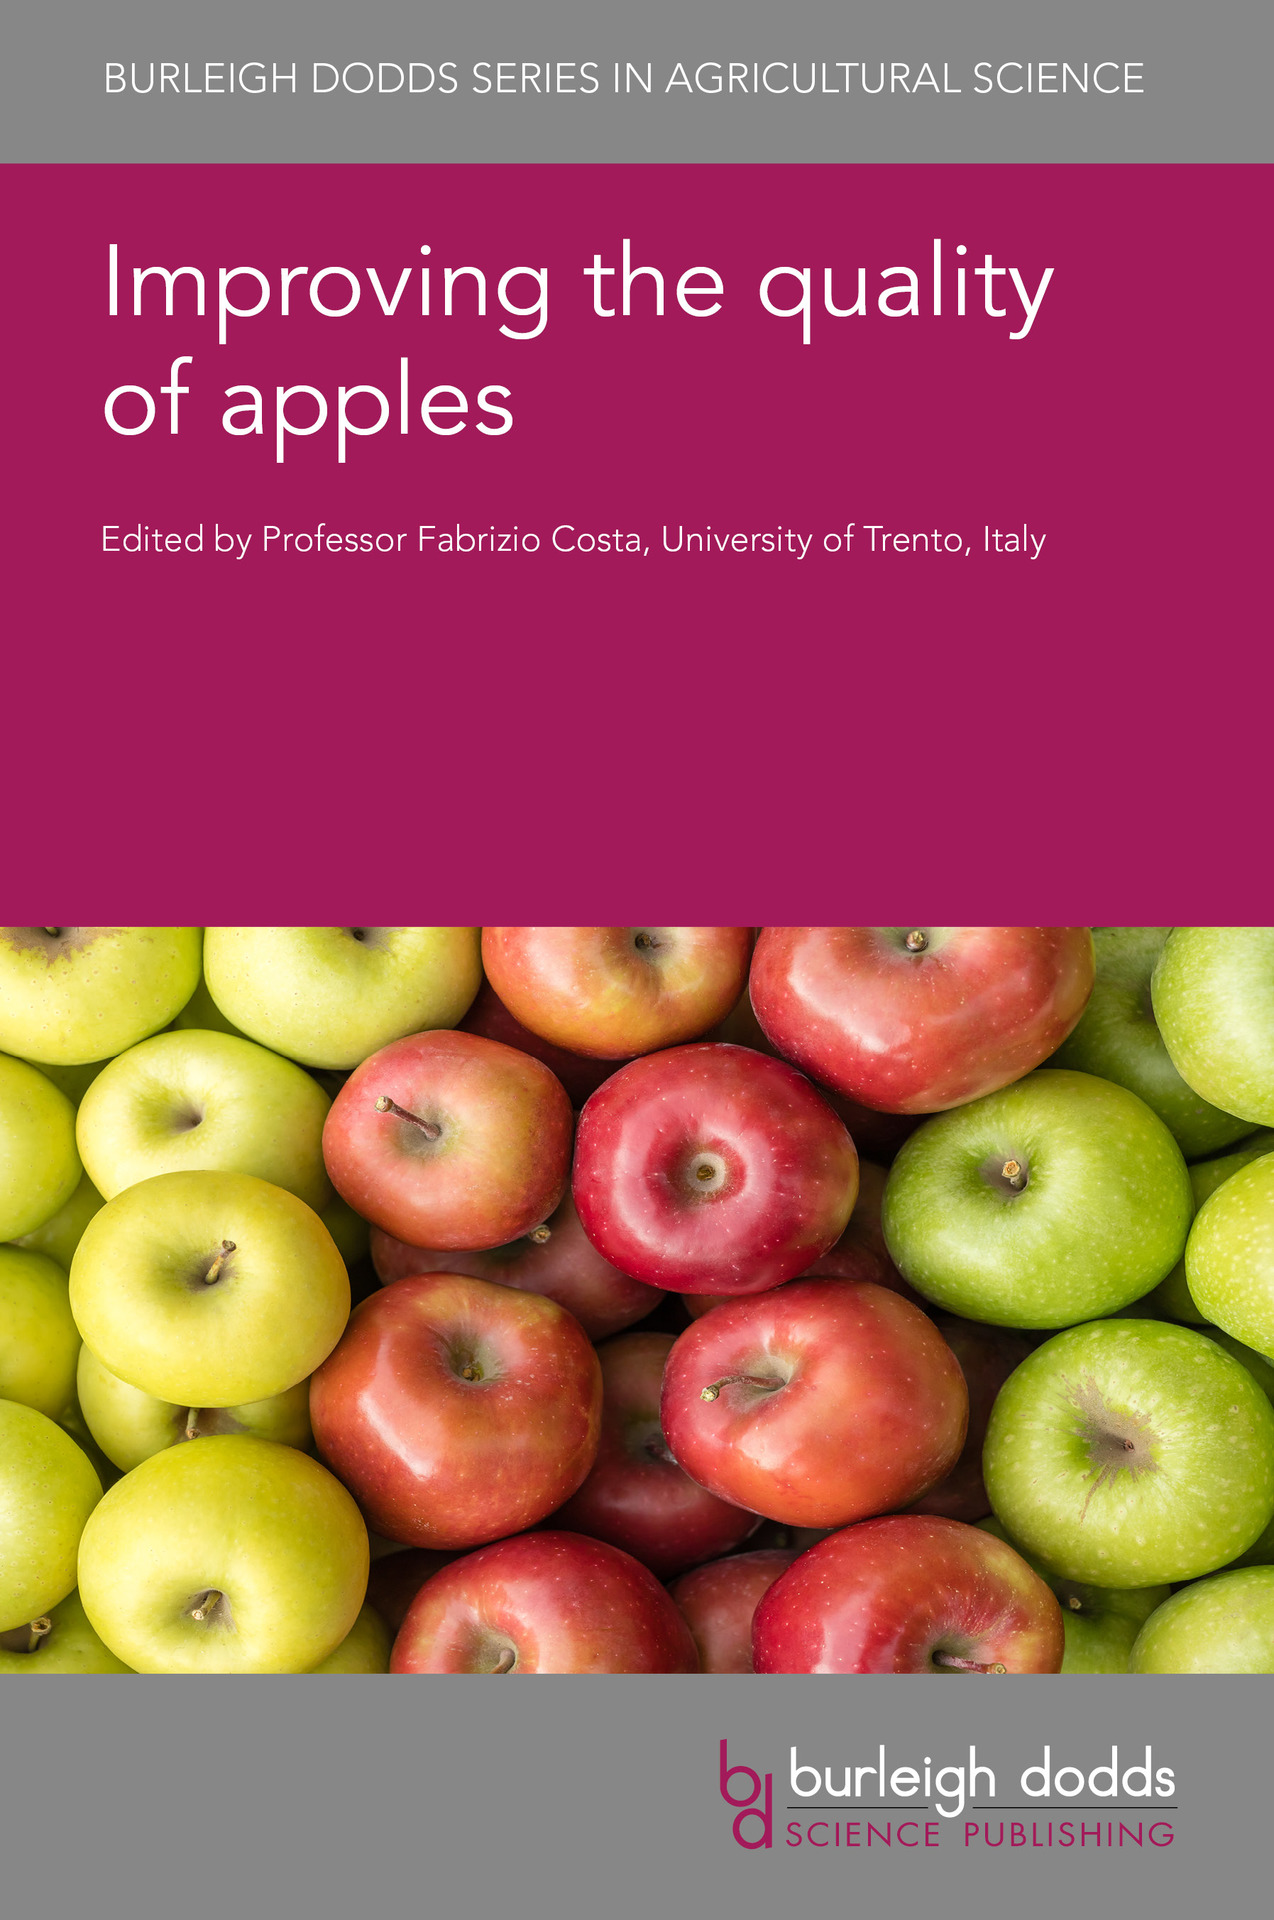 Improving the quality of apples